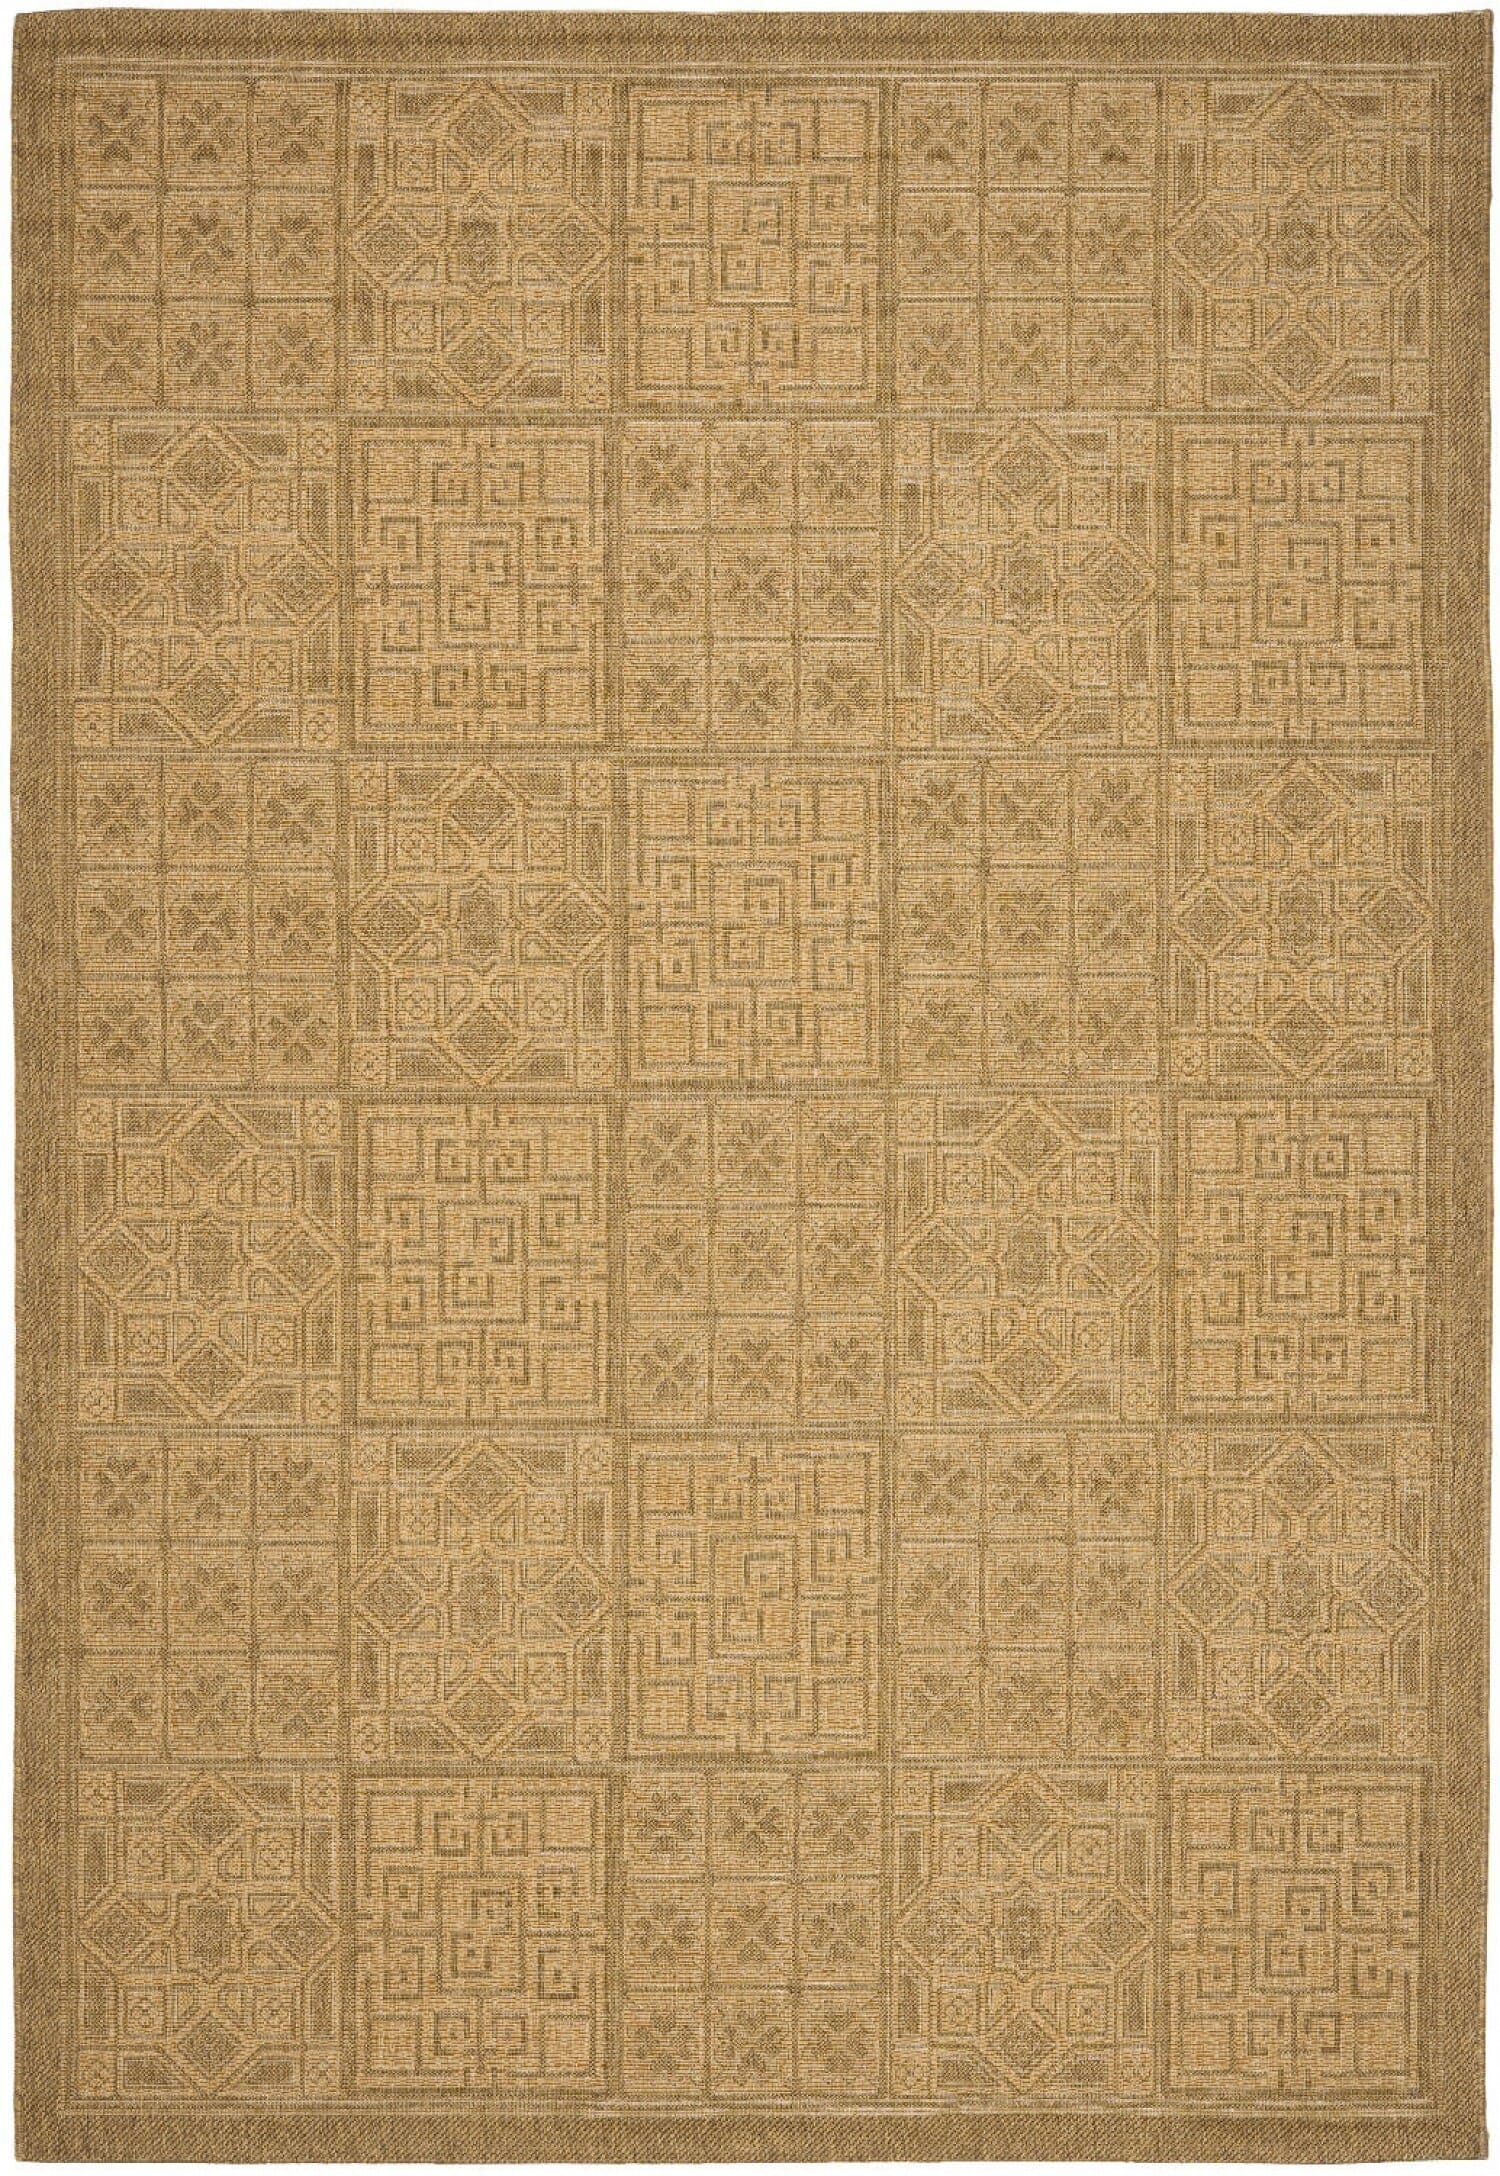 Safavieh Courtyard cy6947-49 Gold / Natural Area Rug